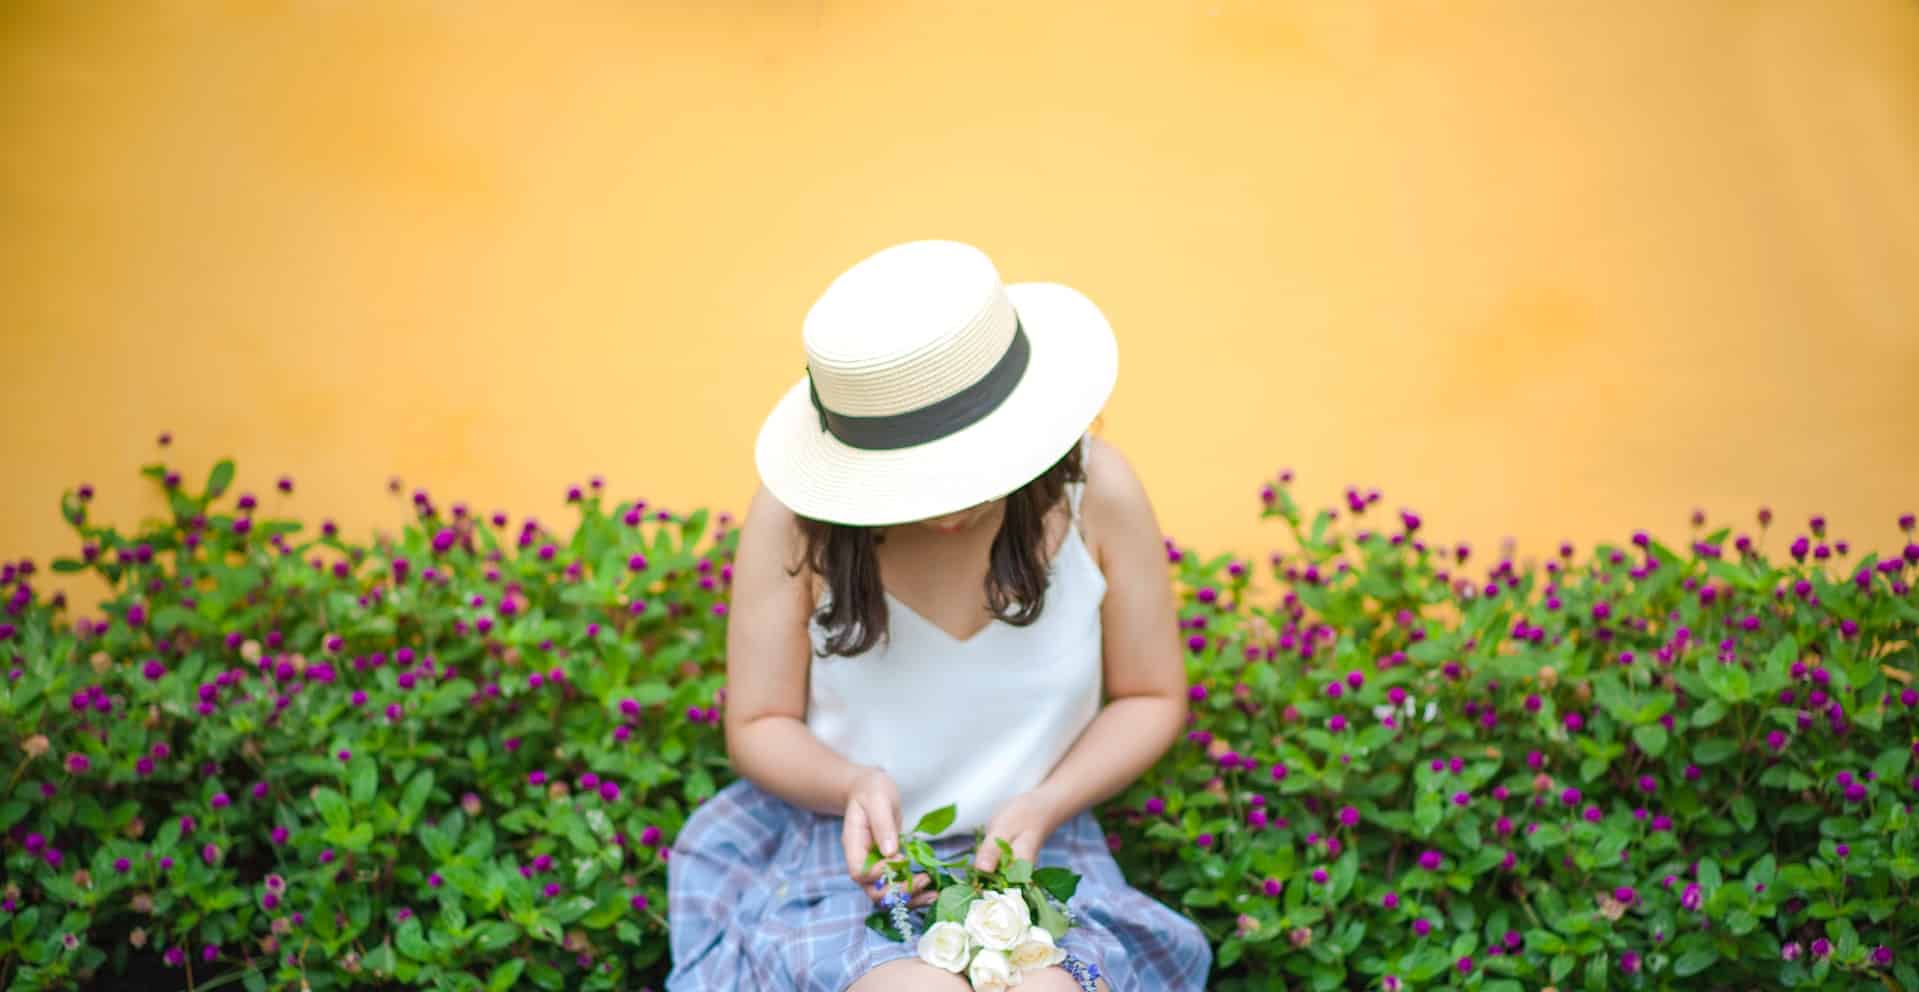 5 best gardening hats for sun protection